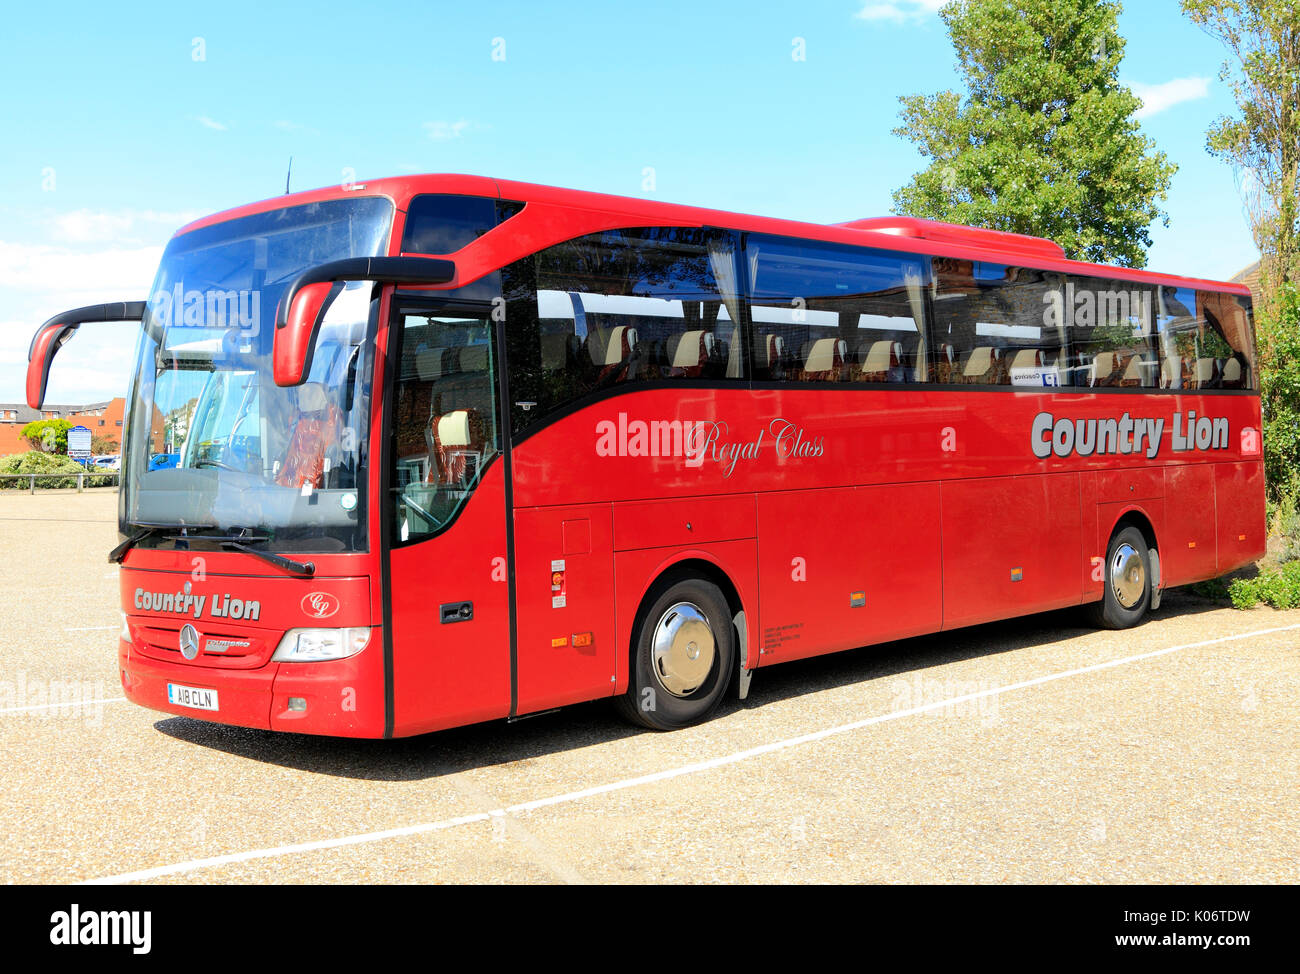 Country Lion, Royal Class, Coaches, coach, Travel, day trip, trips, excursion, excursions, travel company, companies, transport, holidays, England, UK Stock Photo